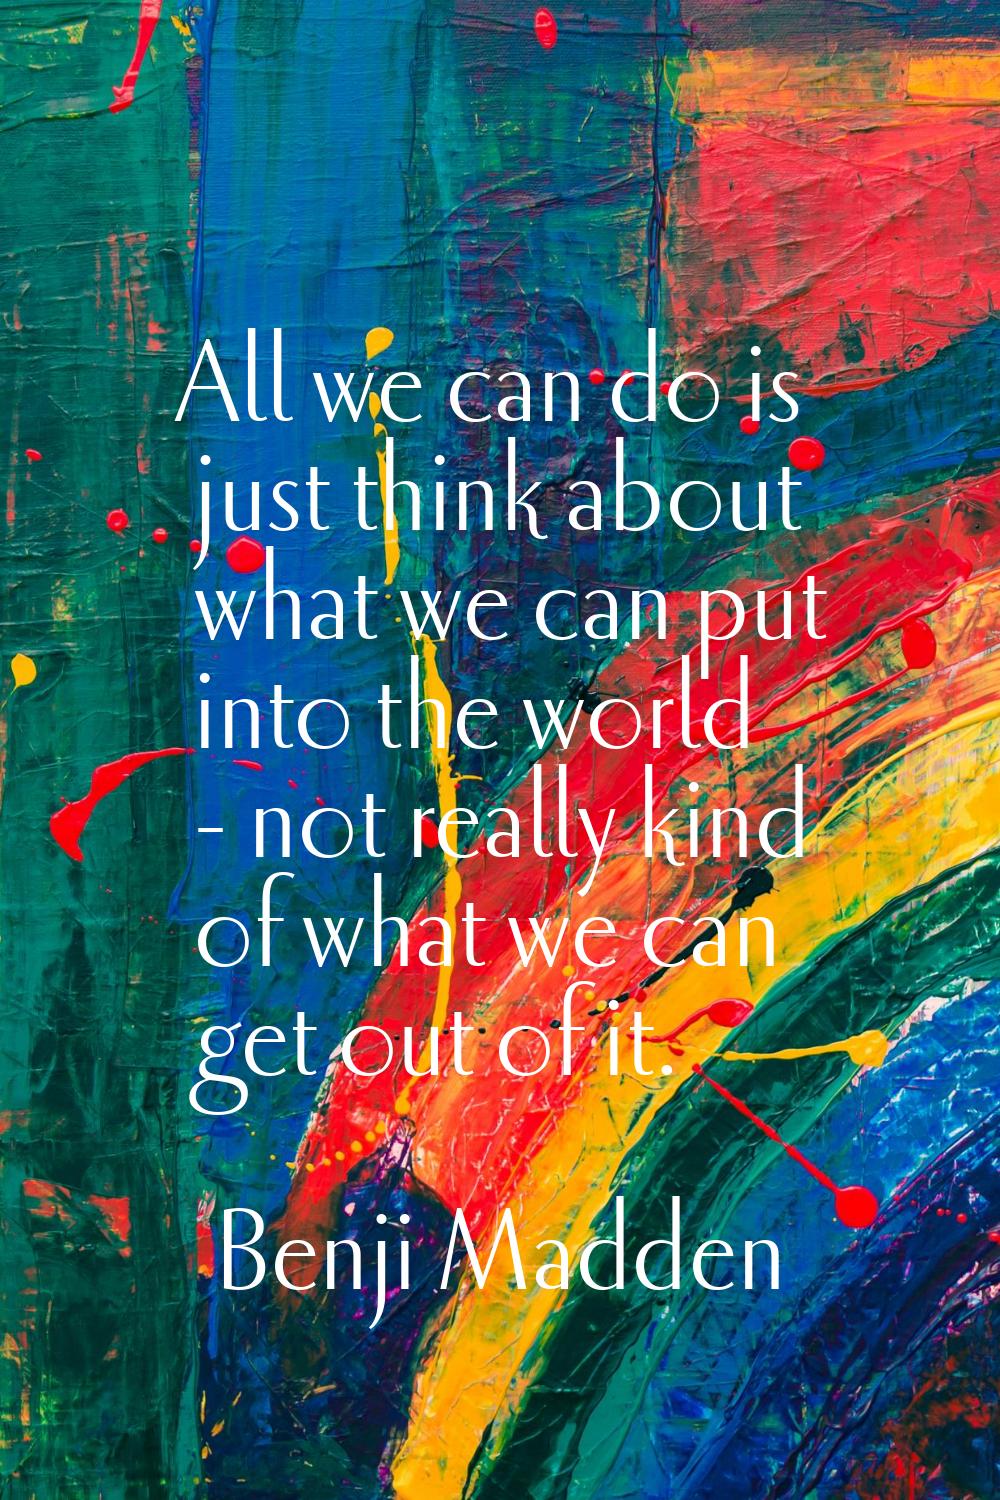 All we can do is just think about what we can put into the world - not really kind of what we can g